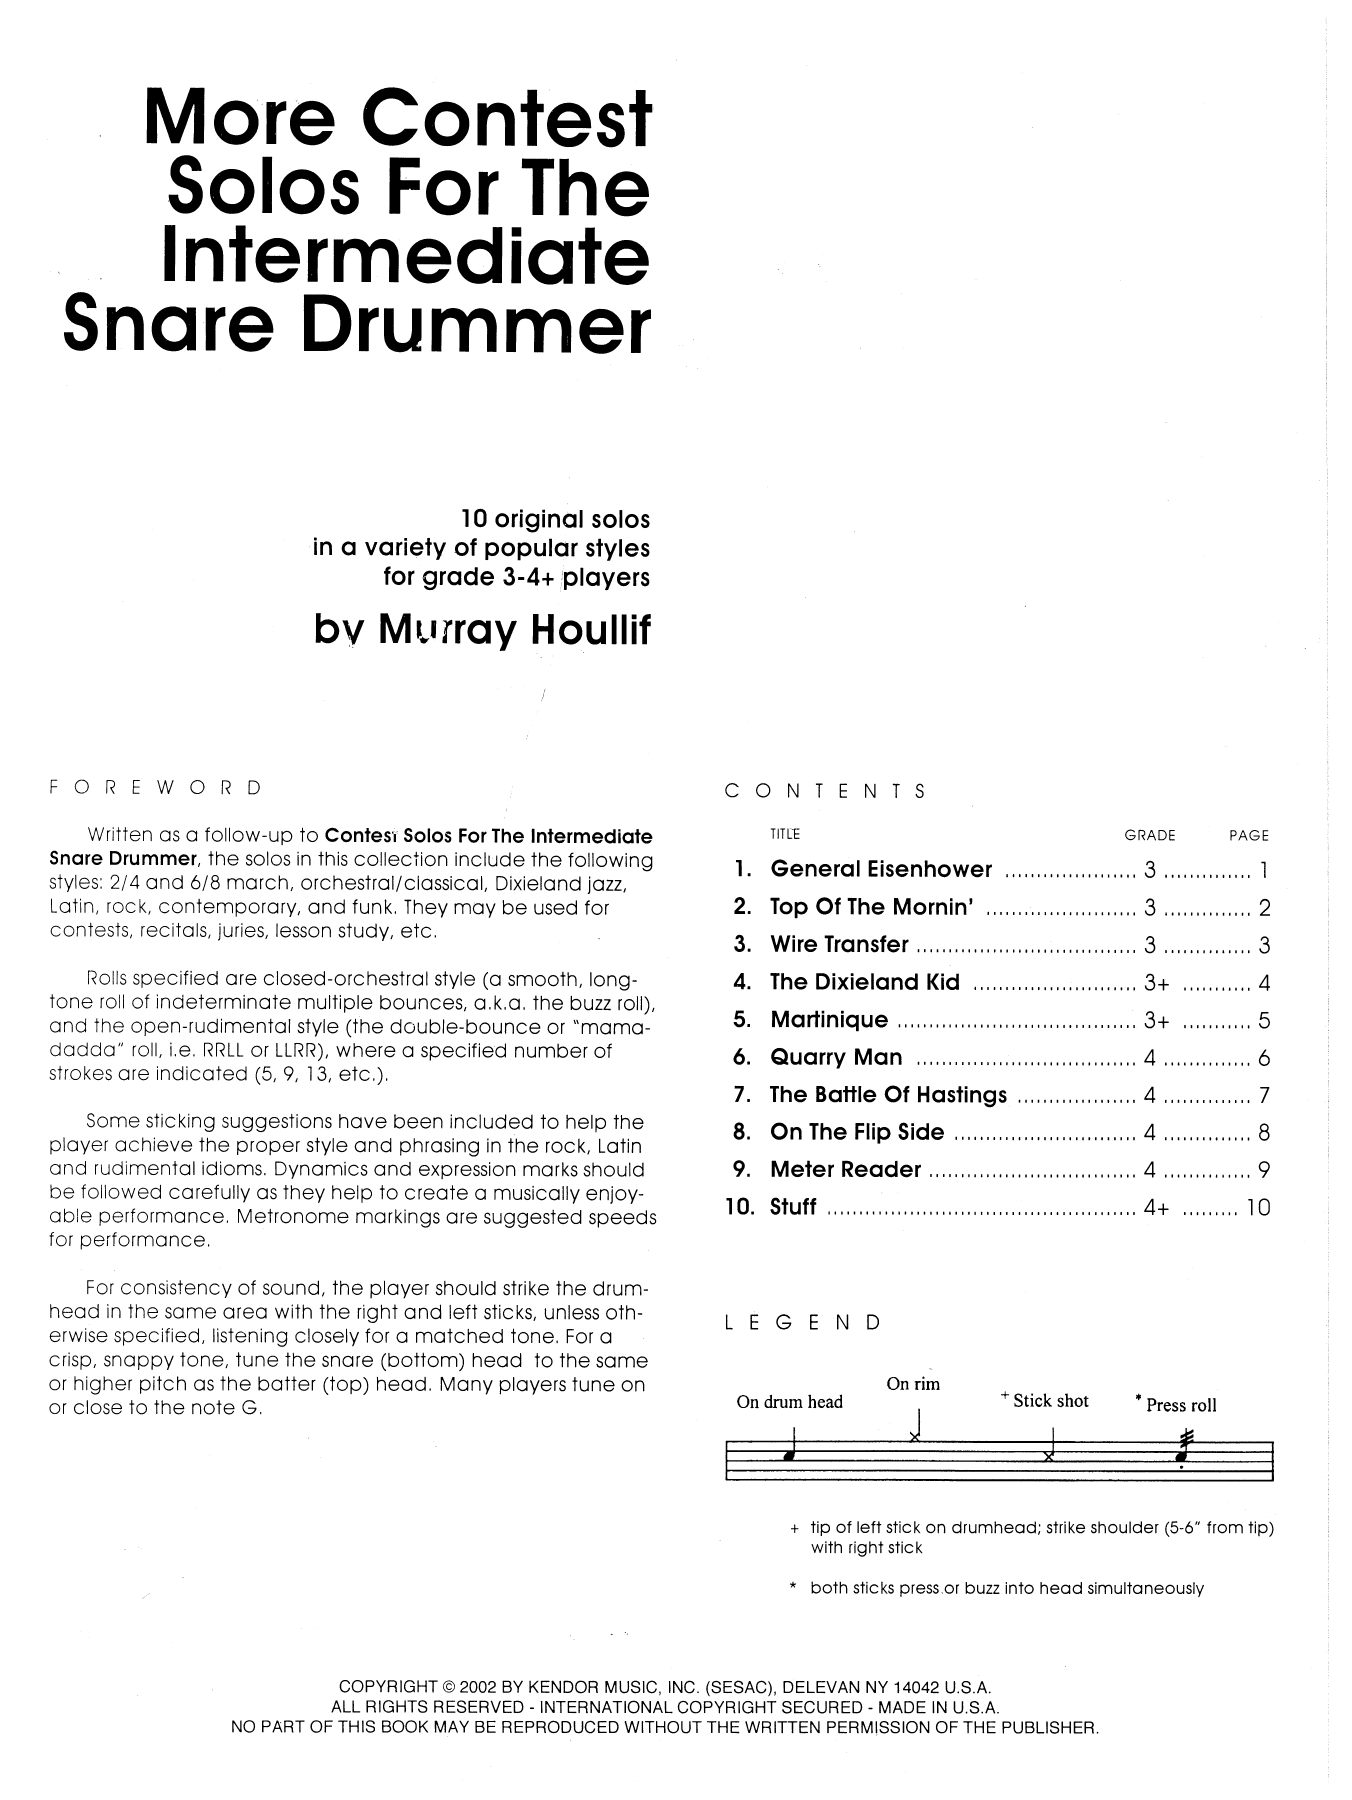 Download Murray Houllif More Contest Solos For The Intermediate Sheet Music